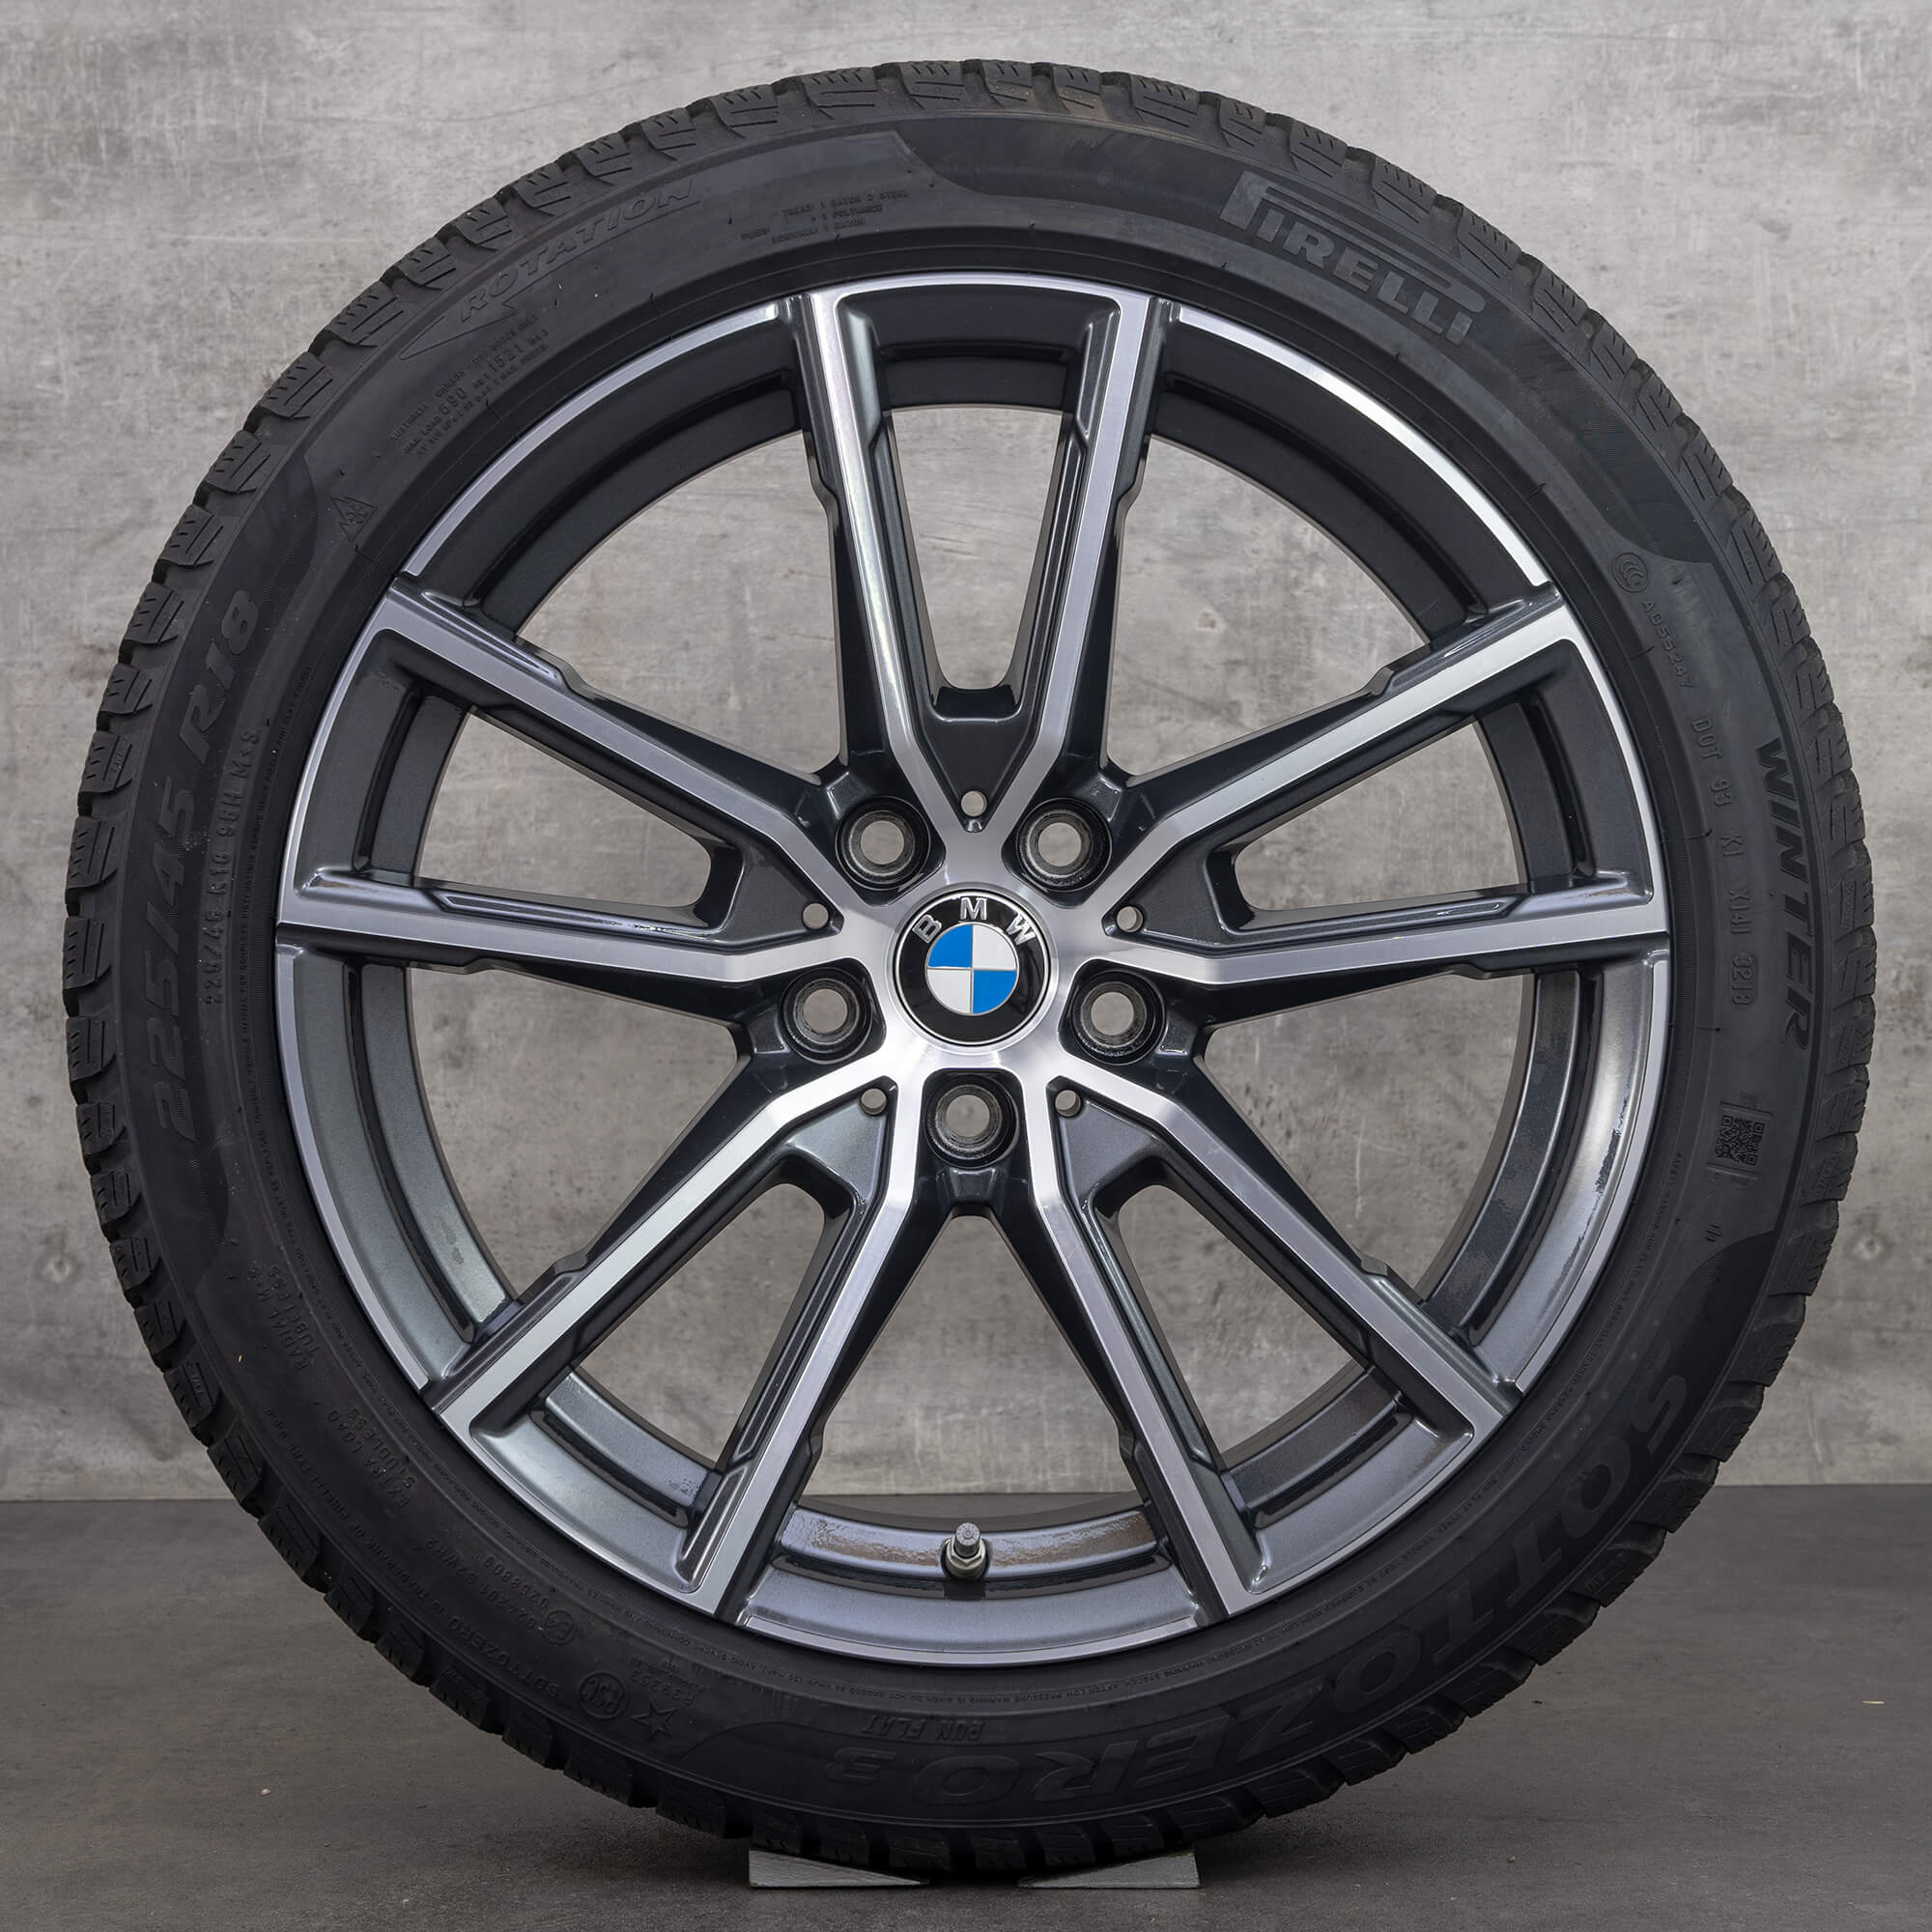 BMW 3 series 18 inch rims G20 G21 winter tires wheels styling 780 6883522